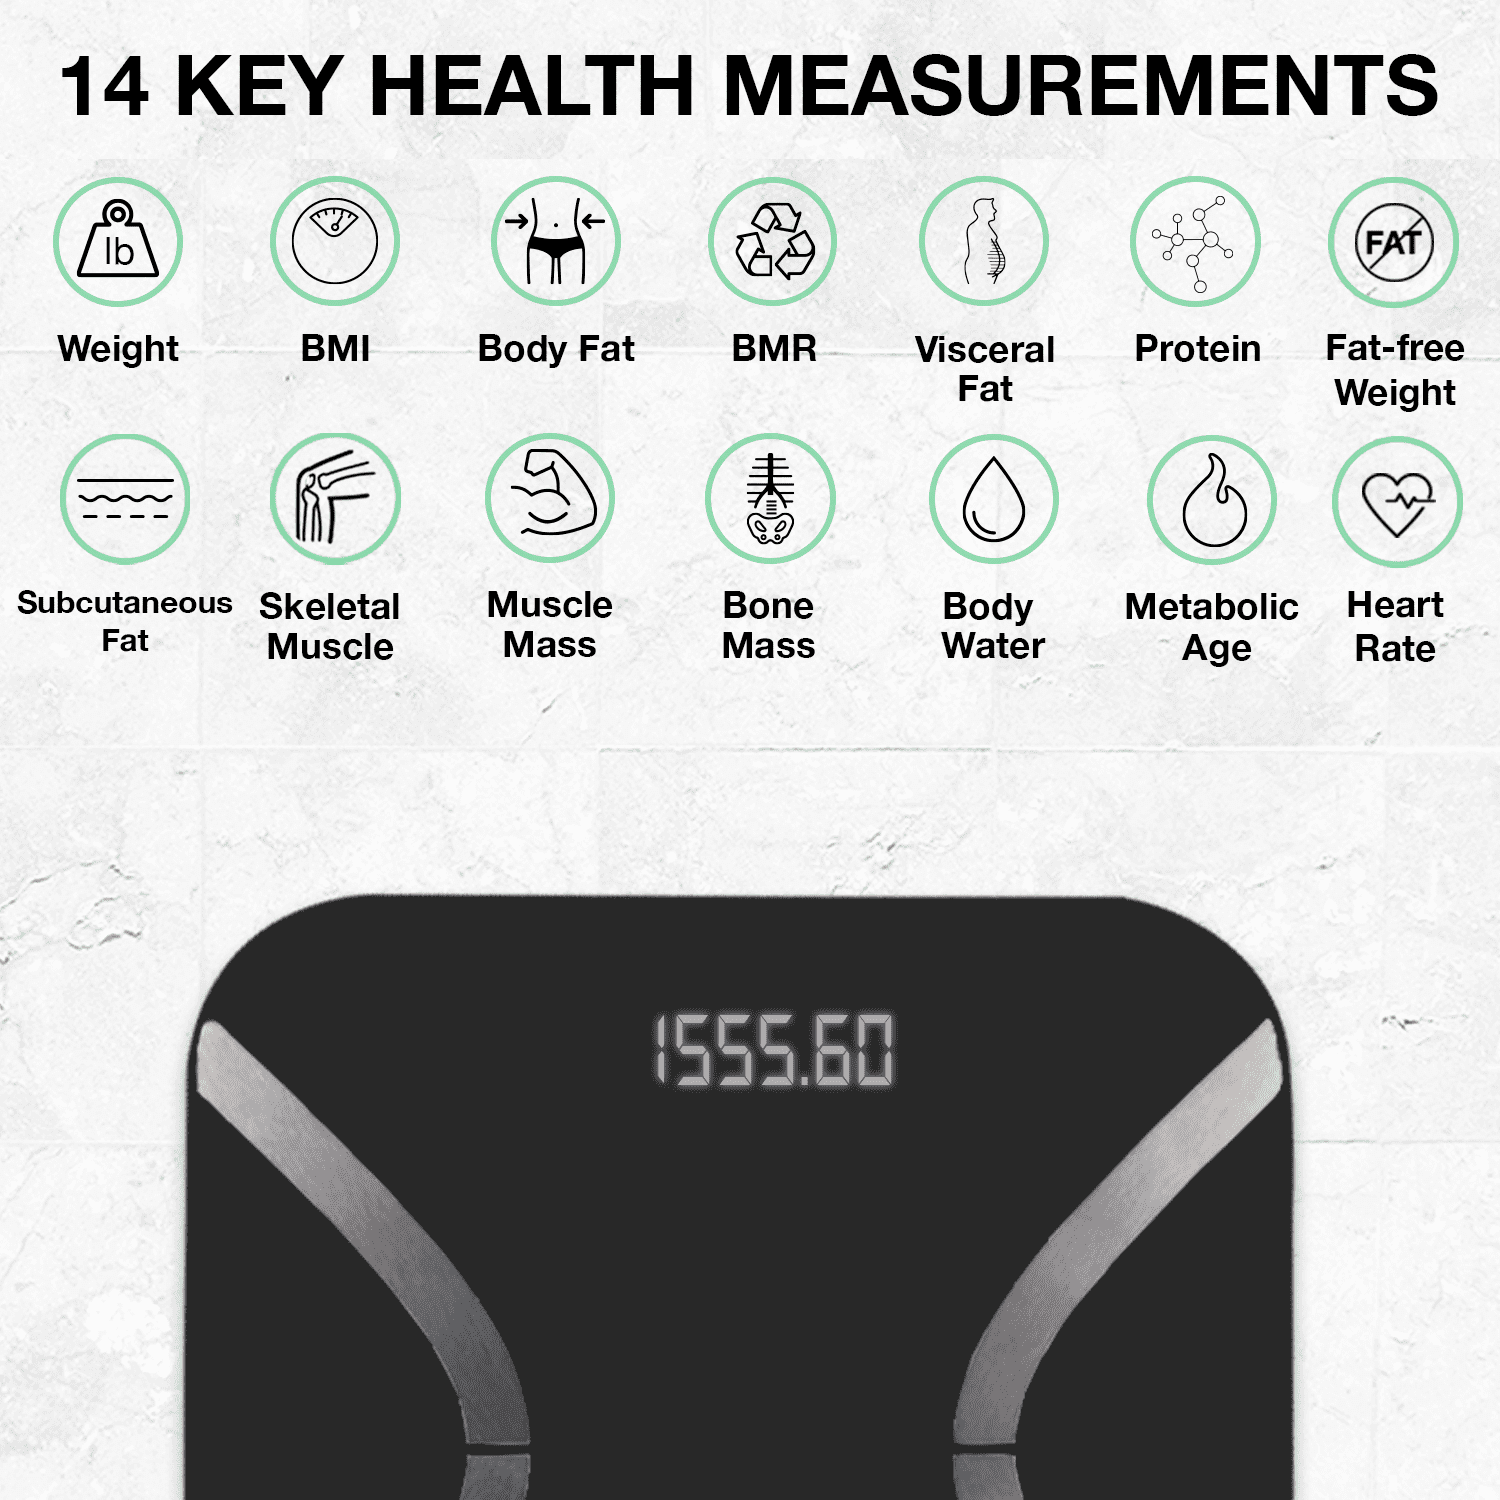 Korescale Smart Scale for Body Weight and Fat Percentage, BMI, Muscle Mass,  Bluetooth with Smartphone App (Black)